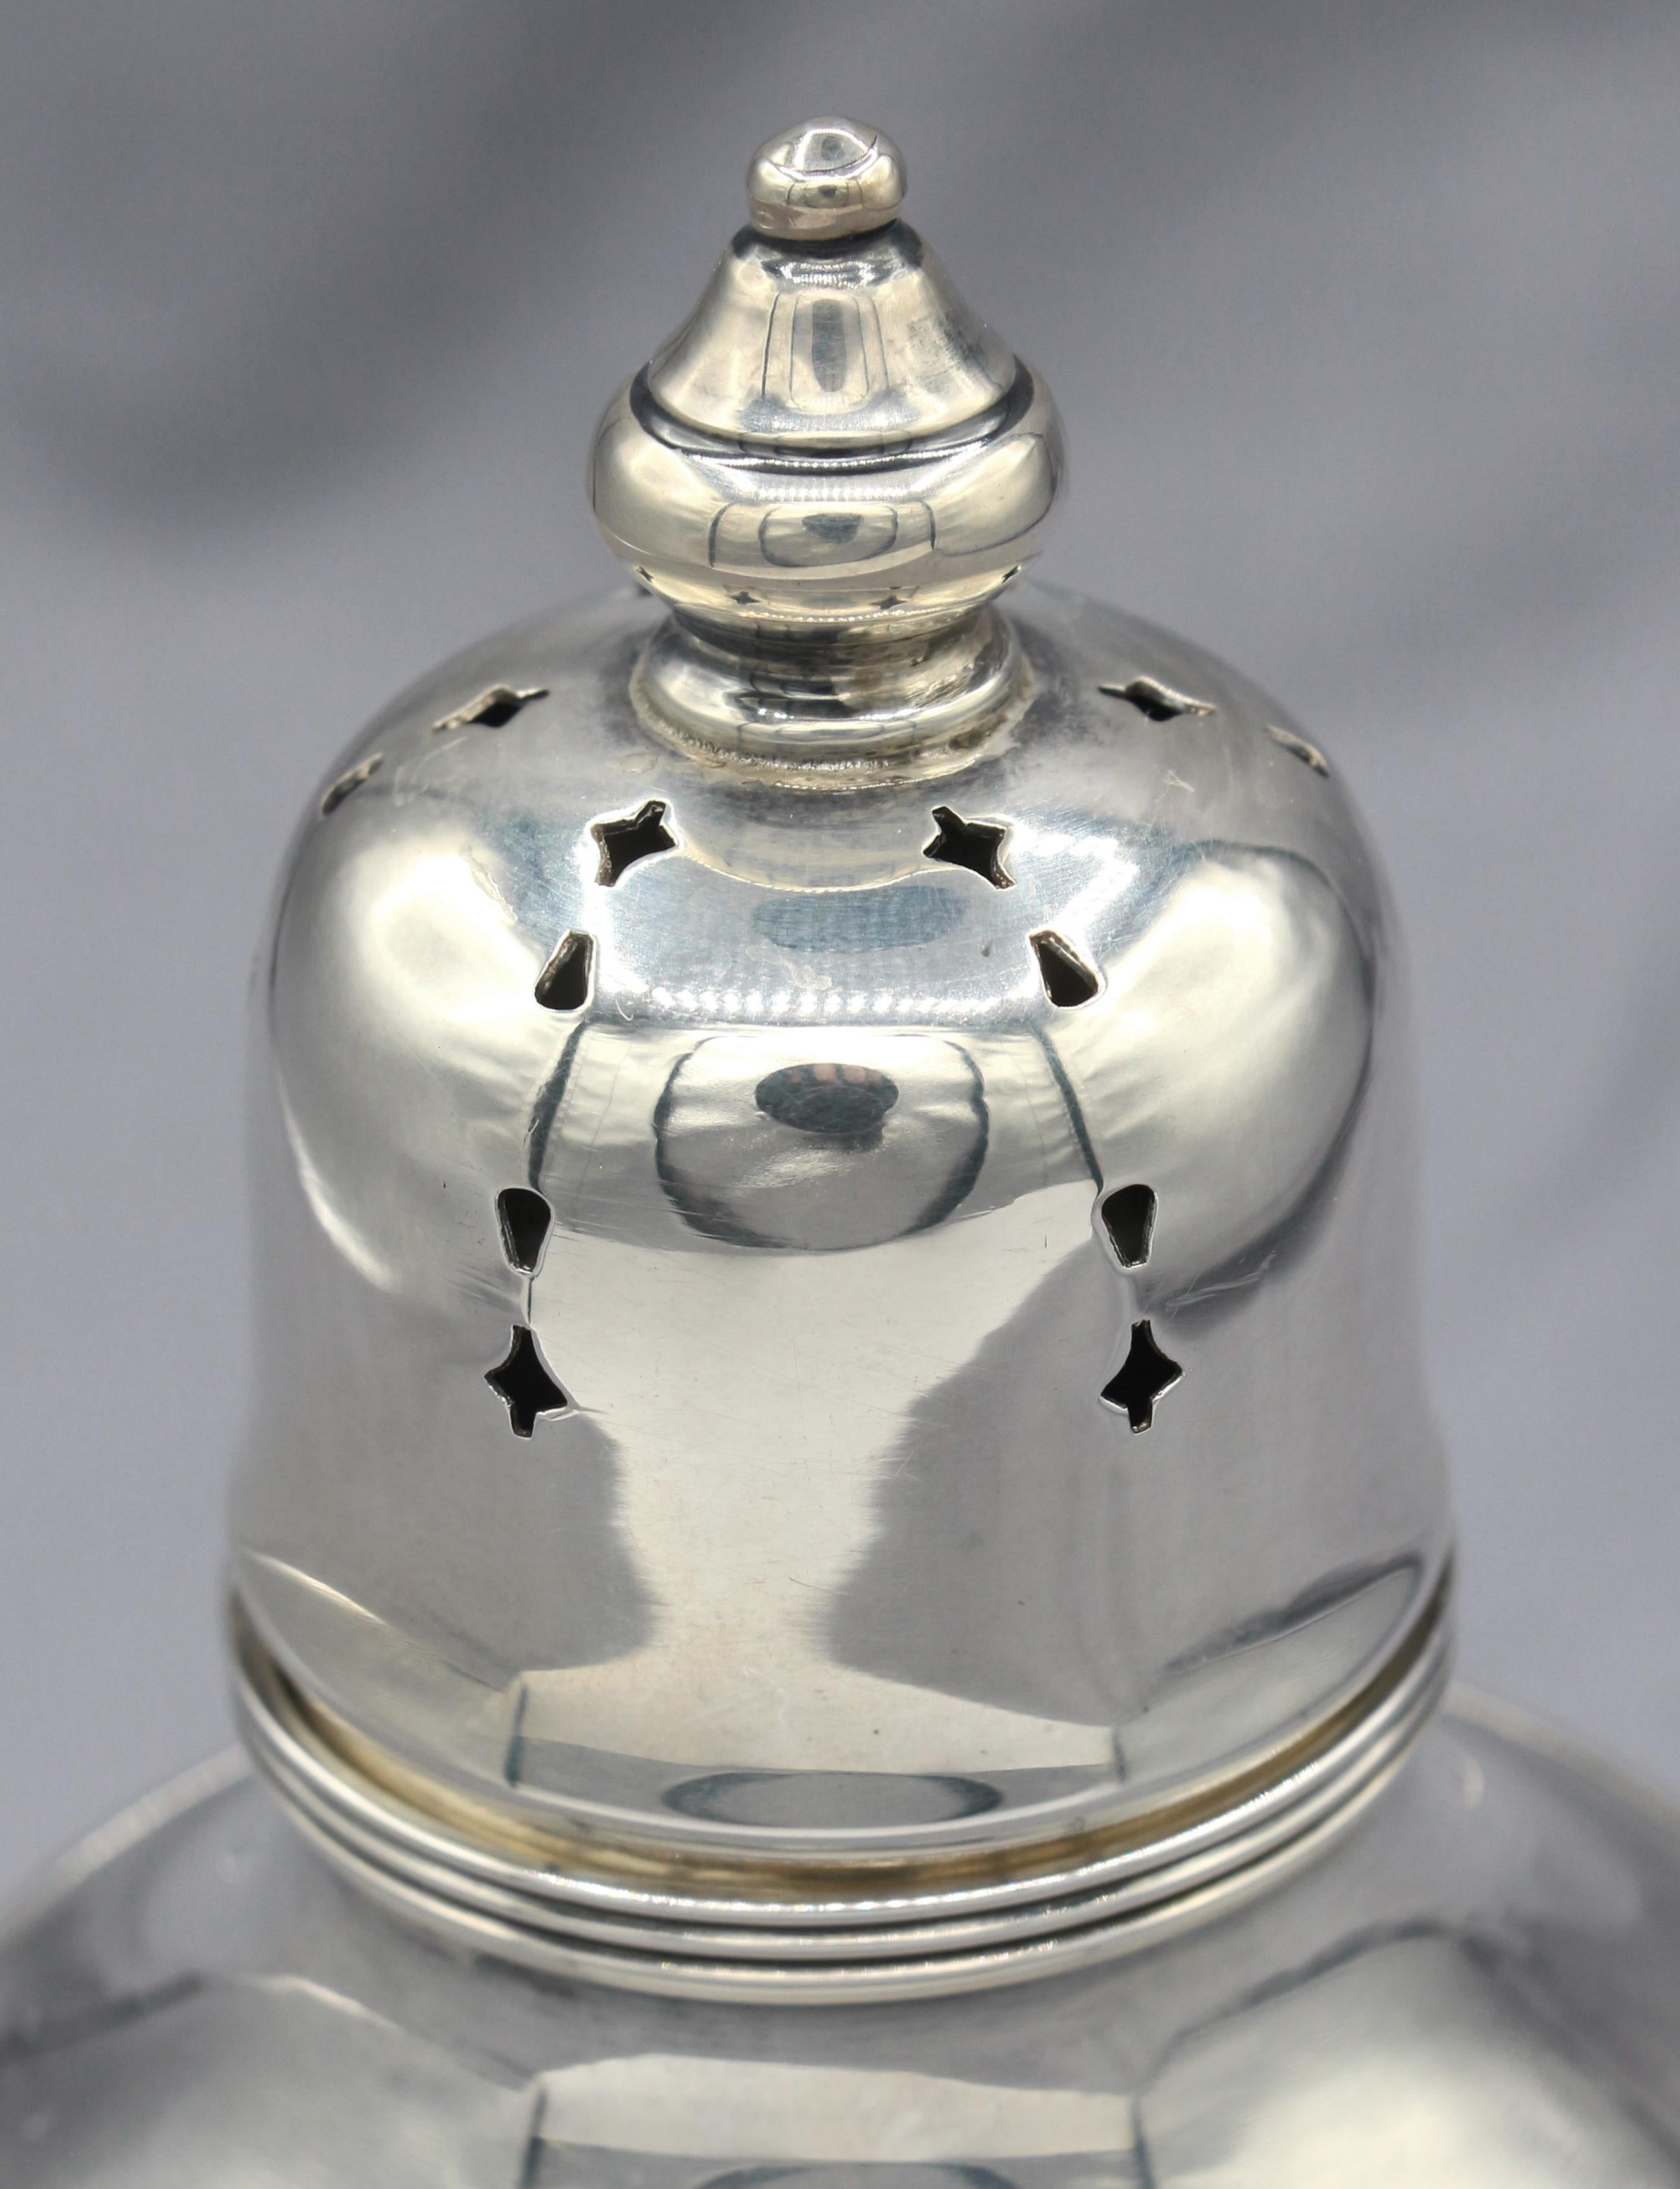 Sterling silver sugar caster by Mueck & Cary, New York City, c.1940s. Boldly classical urn form by a small NYC firm. 4.50 troy oz.
6.5